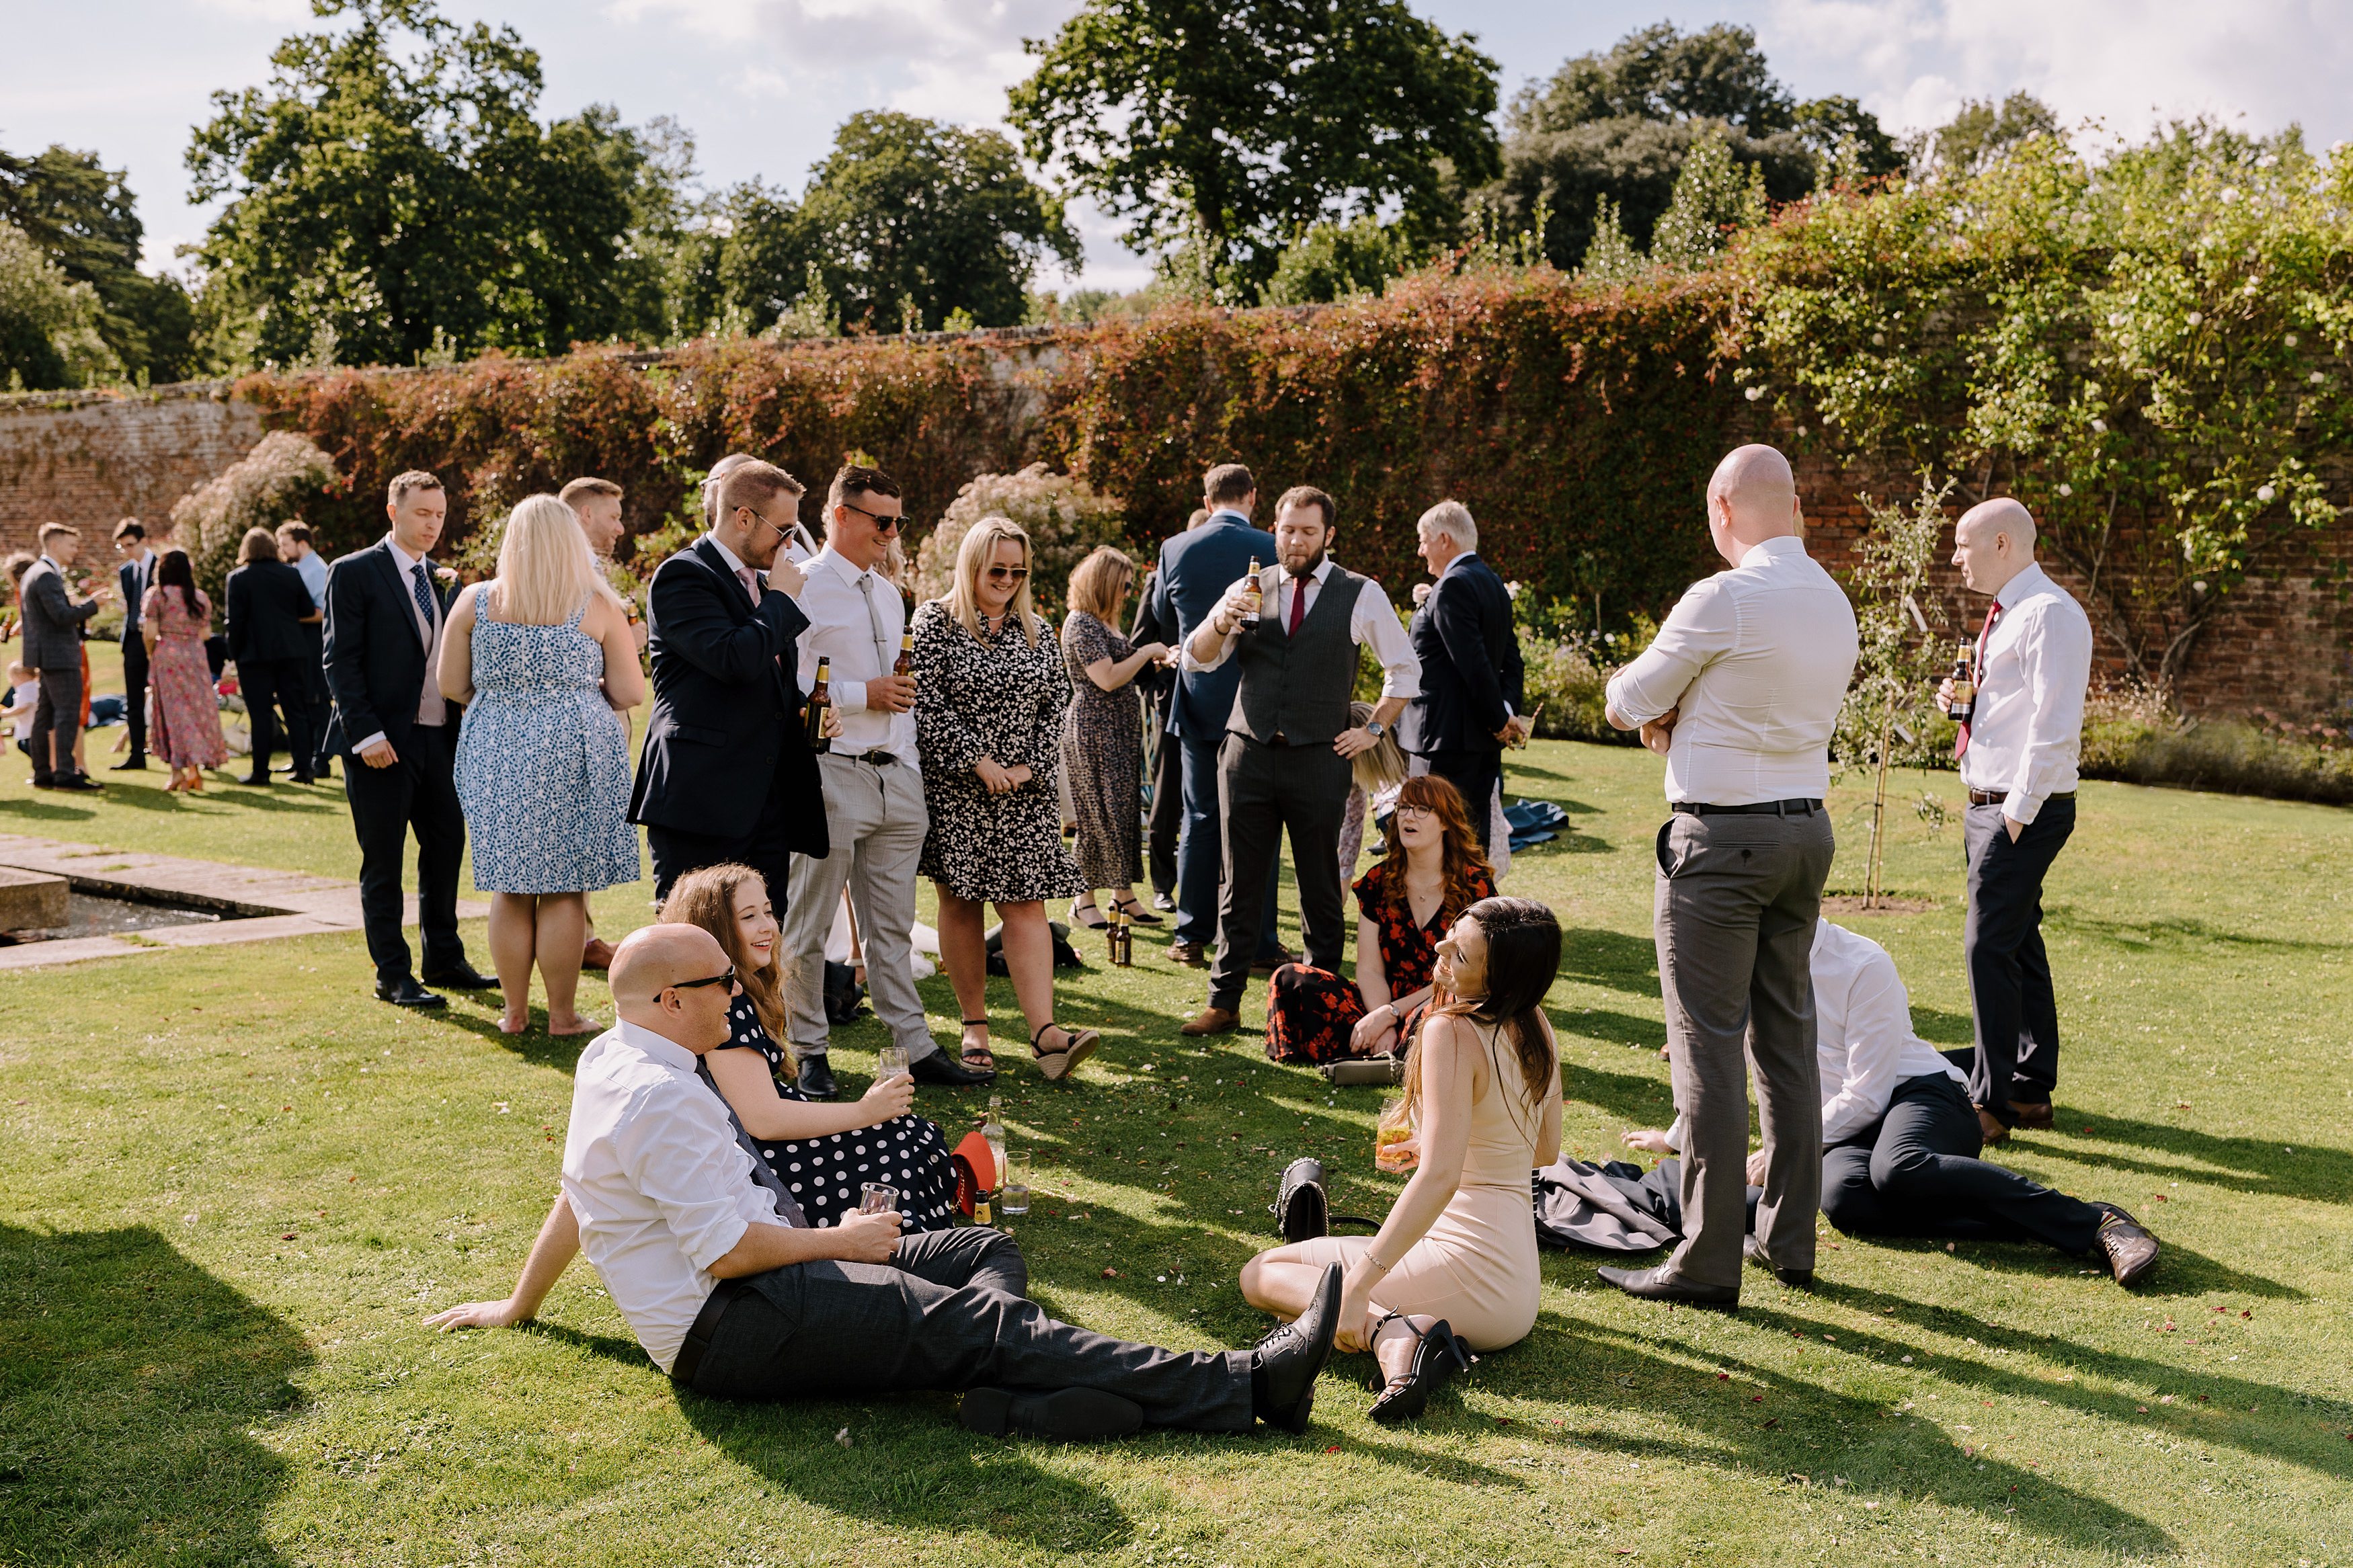 Wedding guests relax by the ornamental pond at Goodnestone Park